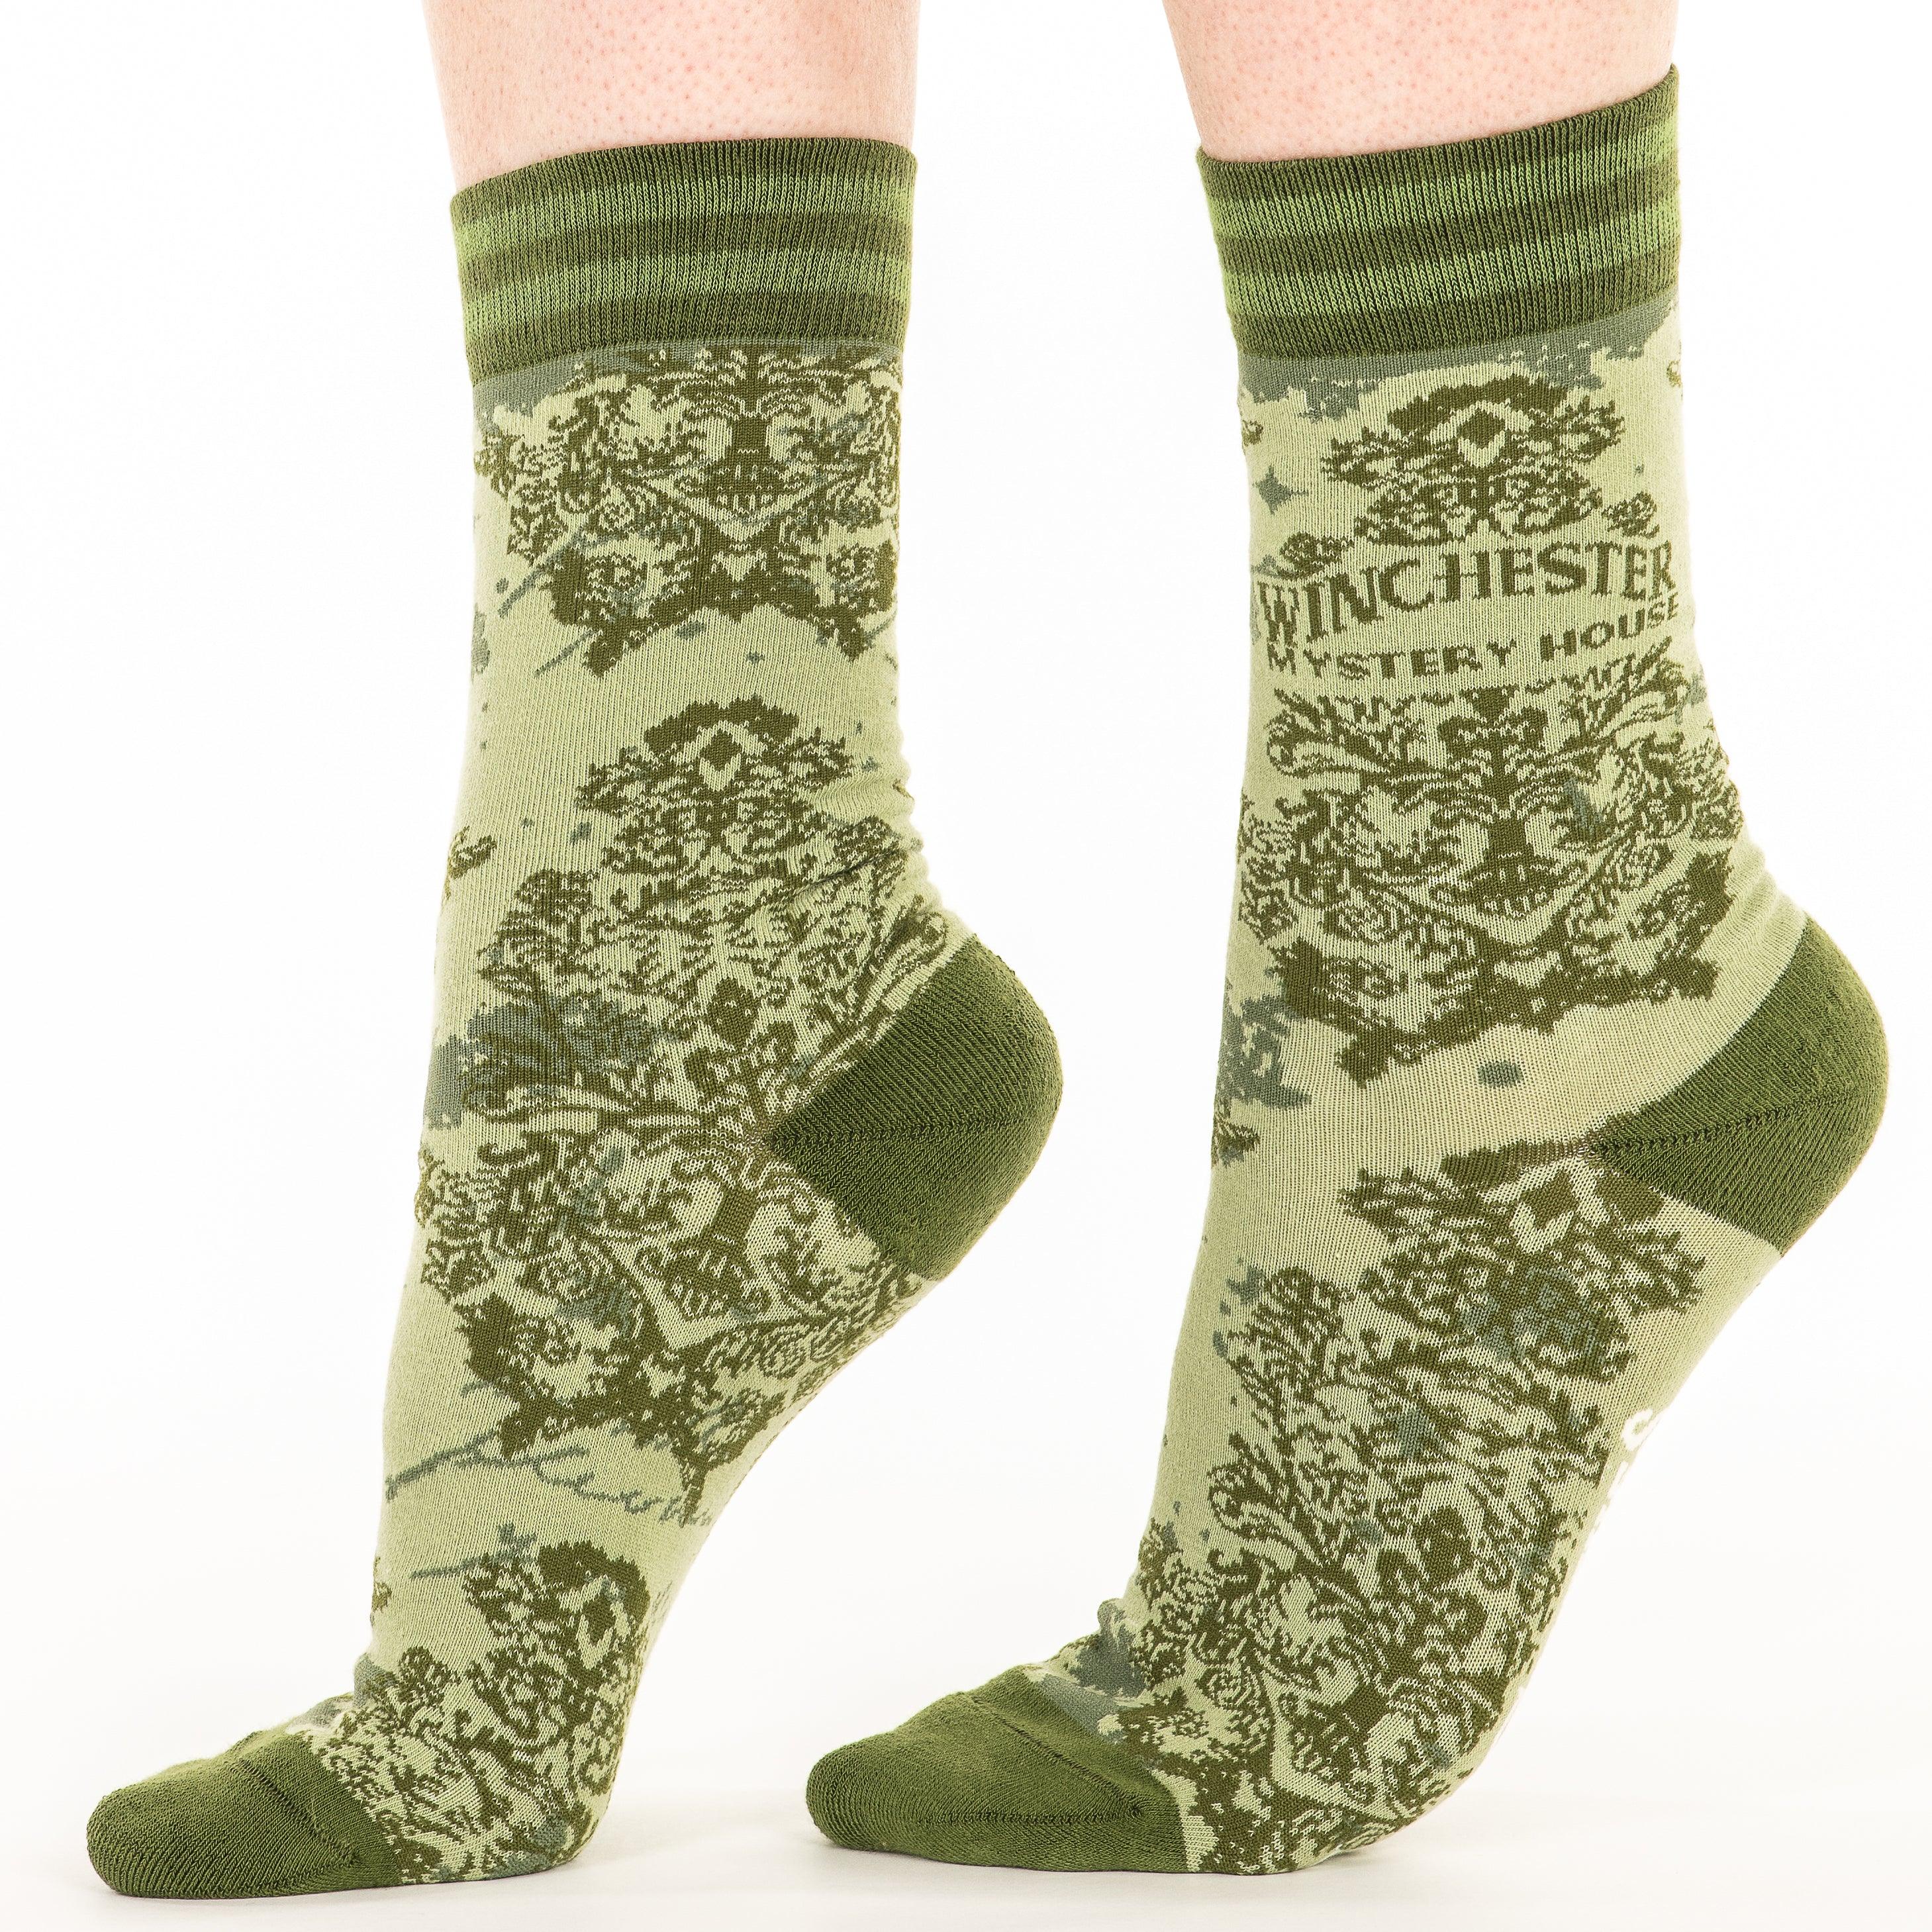 Winchester Mystery House® Ghoulish Green Damask Crew Socks - FootClothes